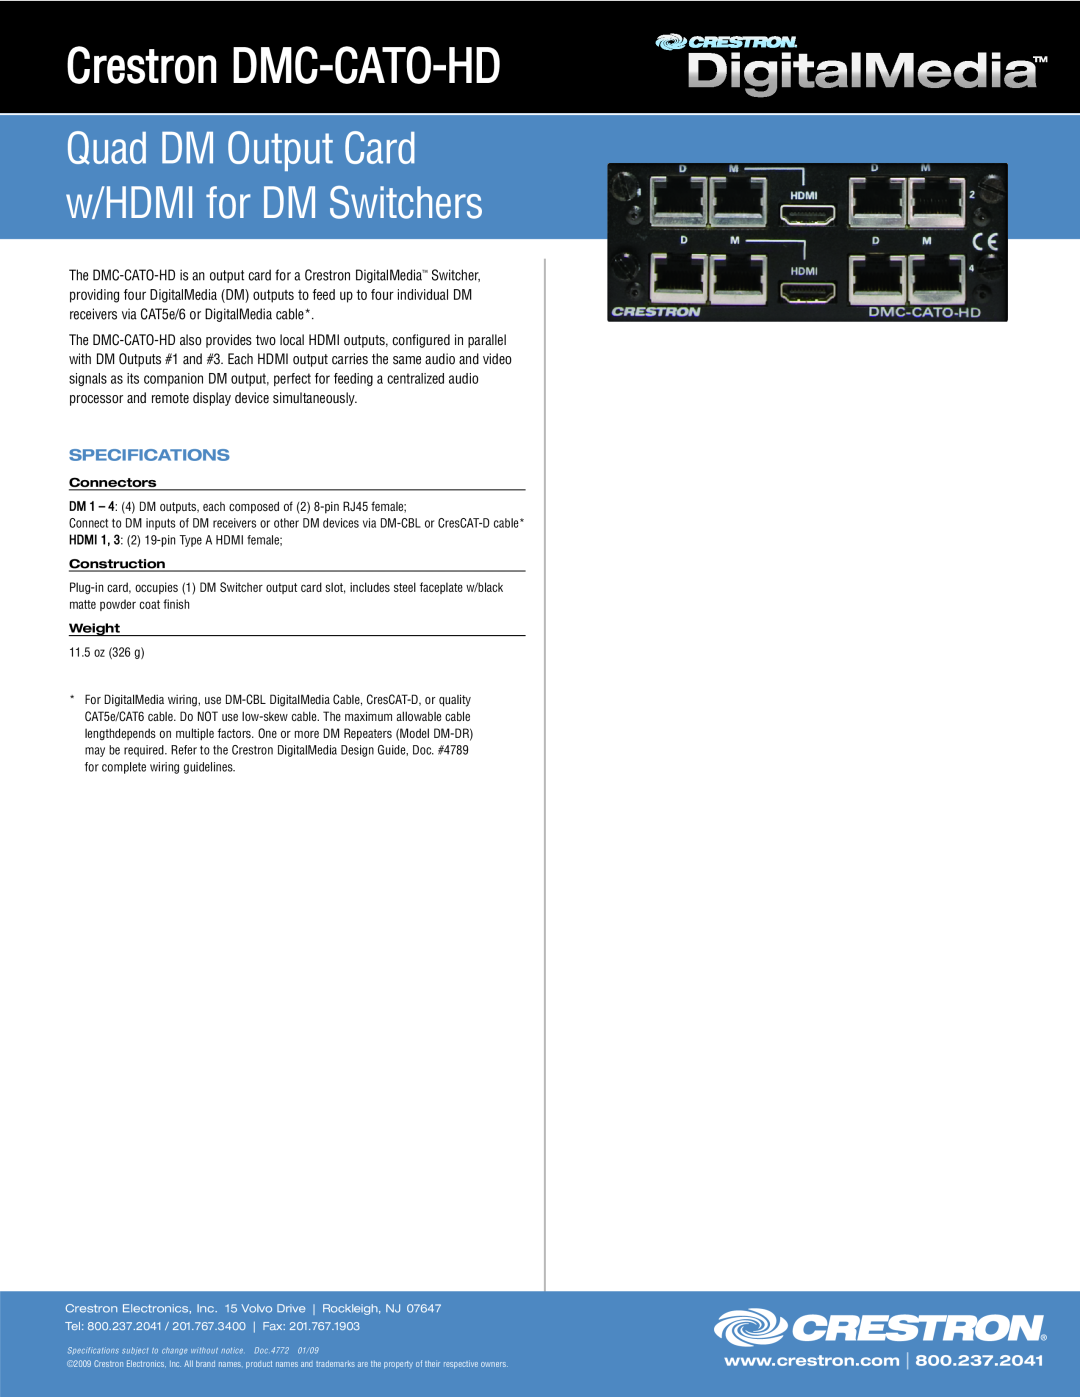 Crestron electronic specifications Crestron DMC-CATO-HD, Quad DM Output Card w/HDMI for DM Switchers, Specifications 